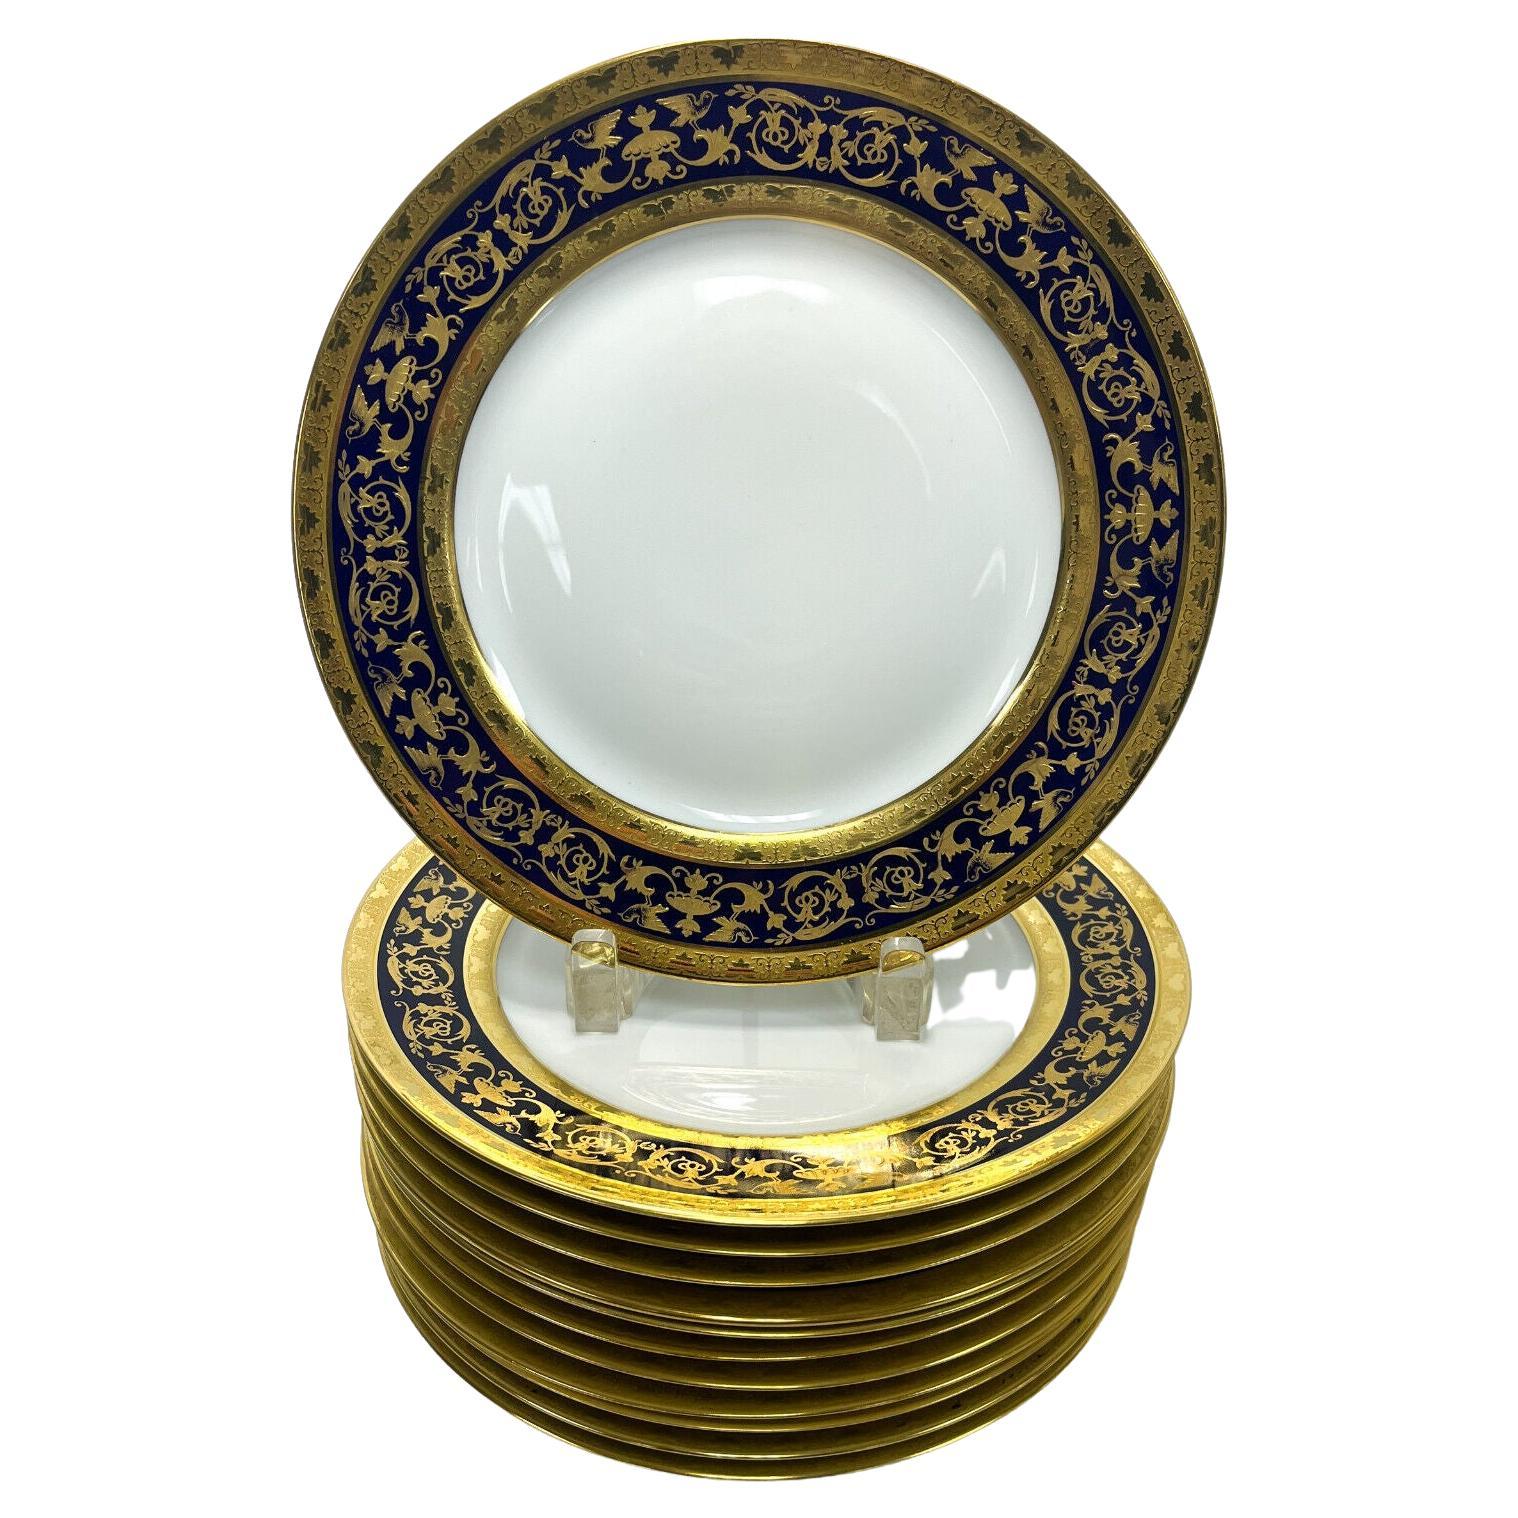  12 Limoges Raynaud Porcelain Dinner Plates in Pompei